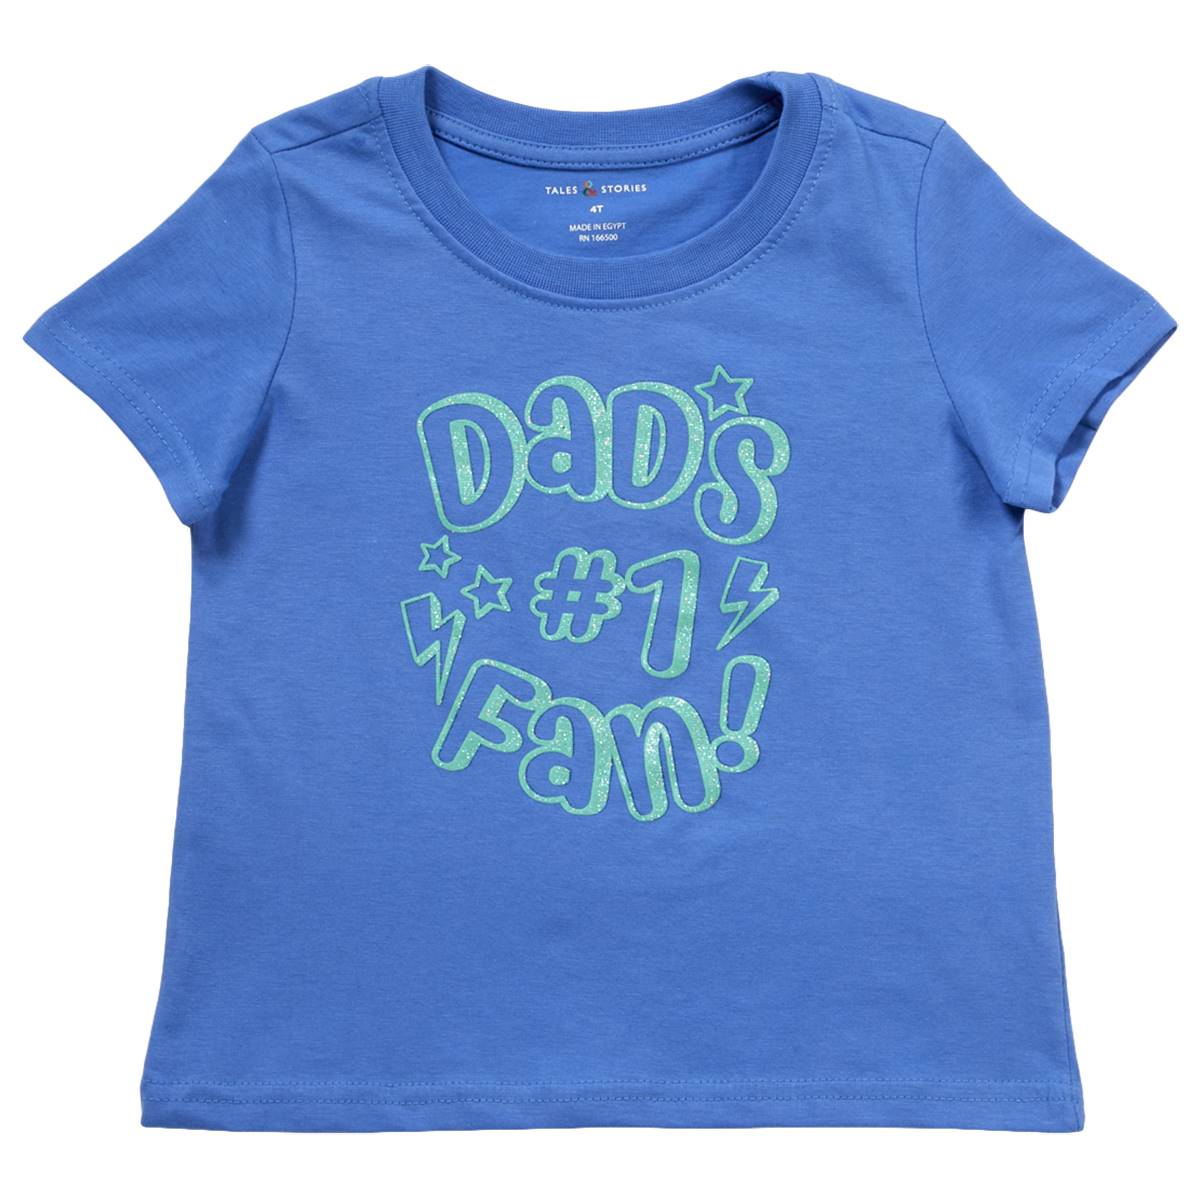 Toddler Boy Tales & Stories Short Sleeve Dads #1 Fan Graphic Tee